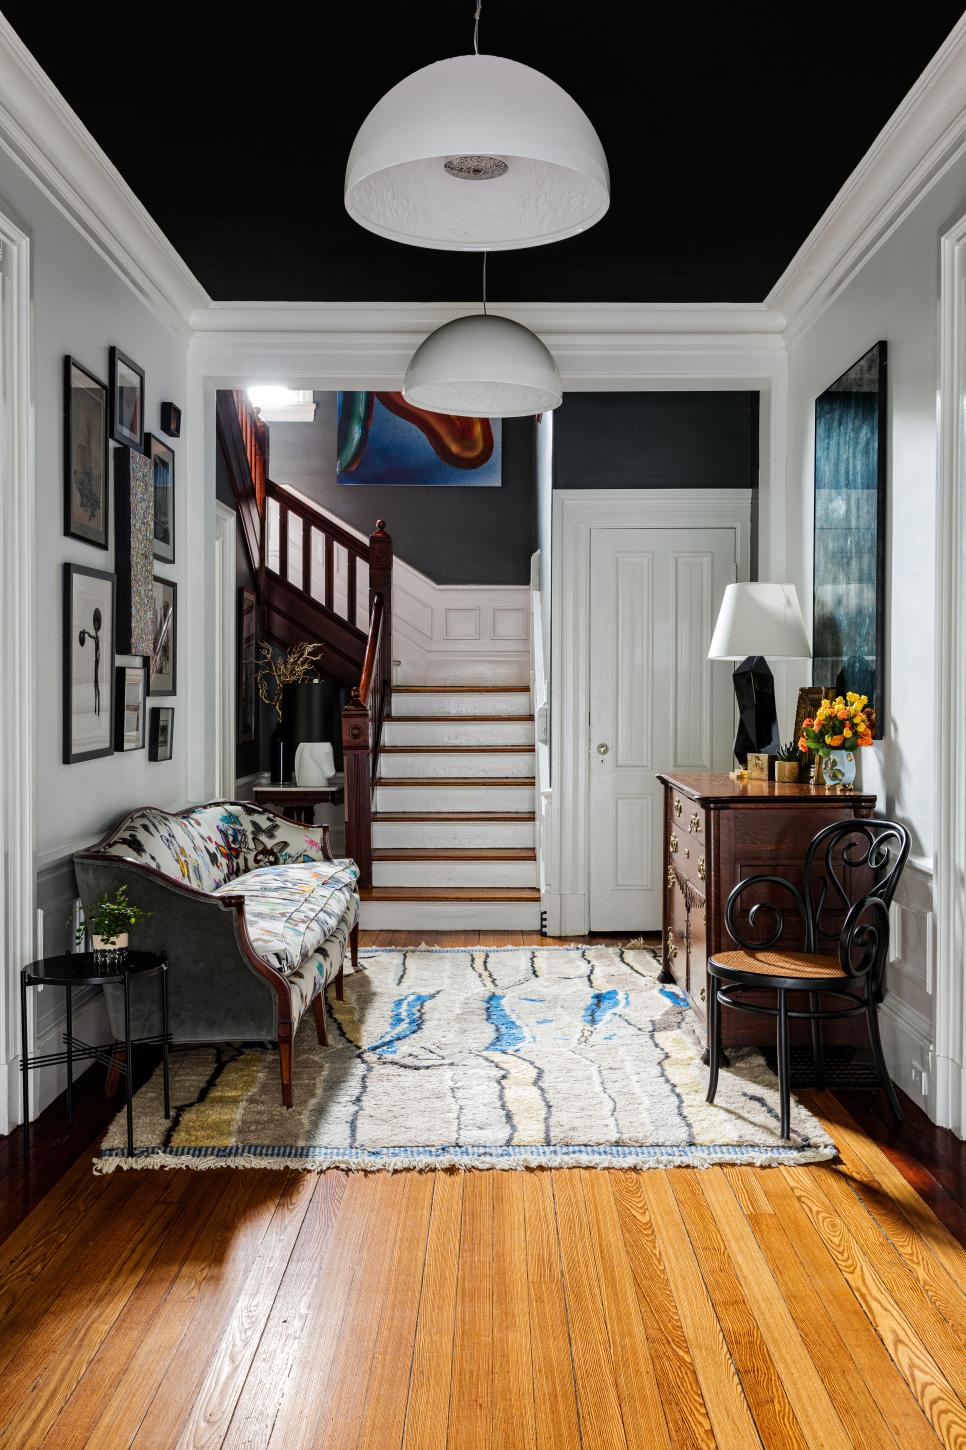 An Eclectic Foyer Features a Black Ceiling, Modern Light Fixtures and a